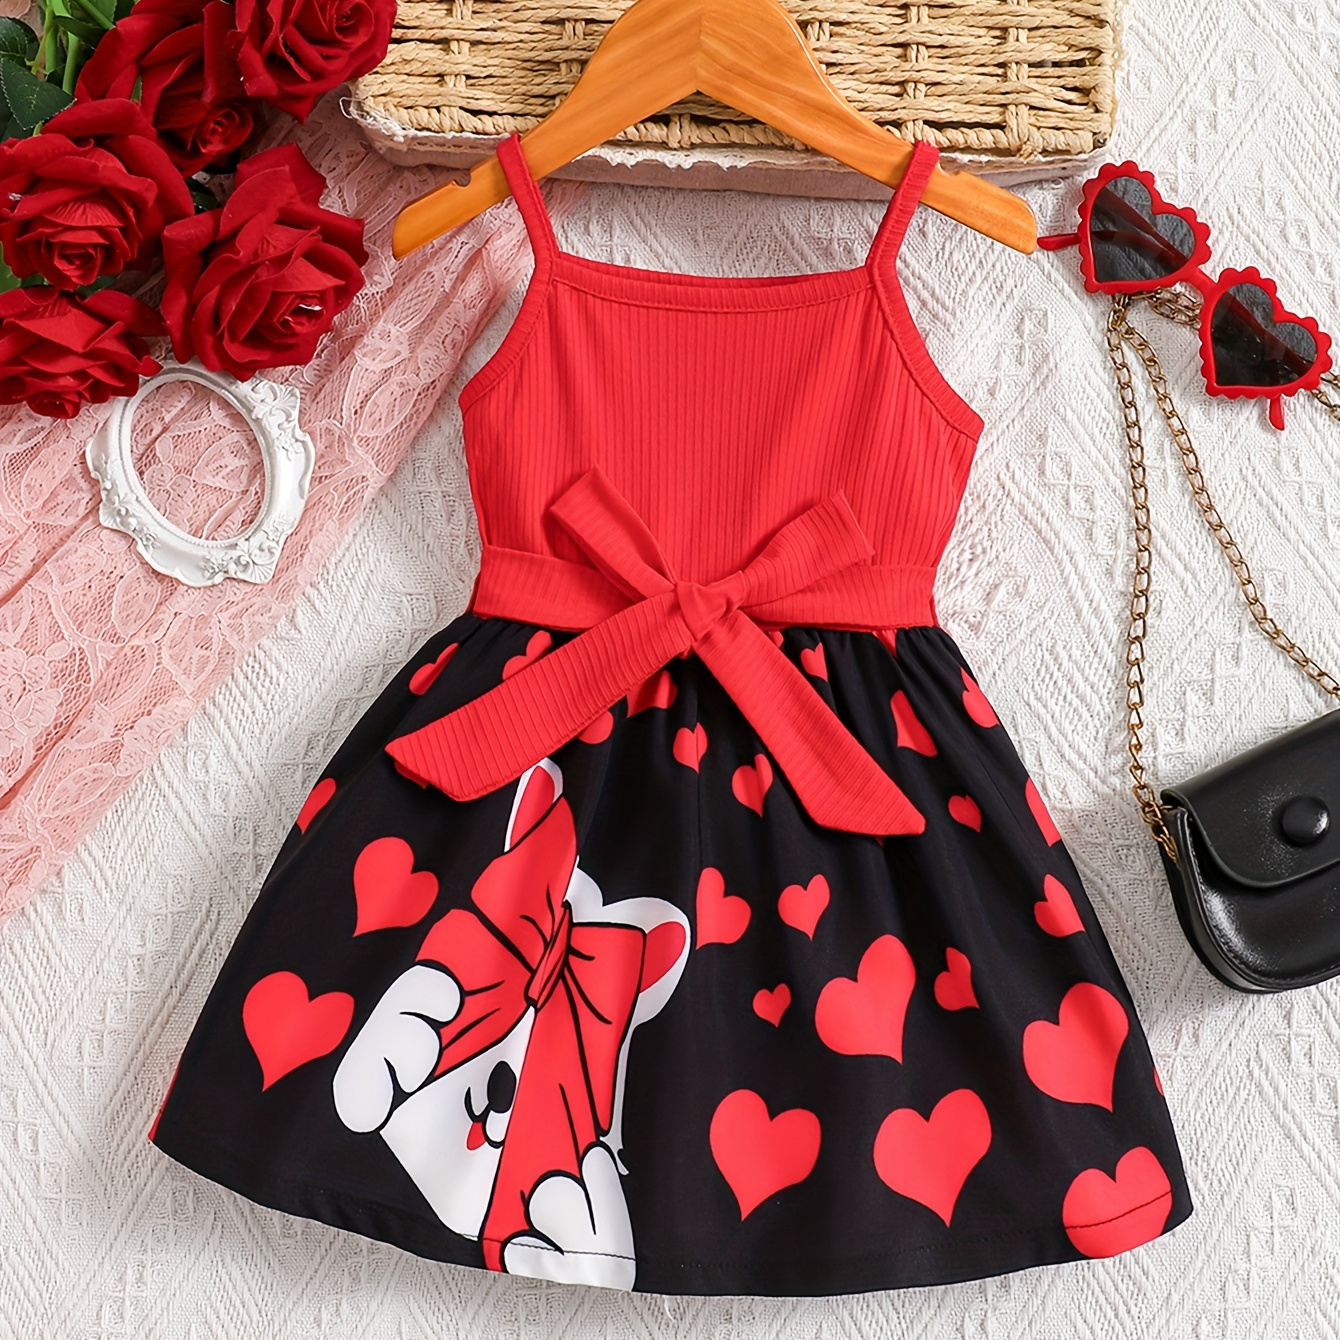 

Baby's Cartoon Cat & Heart Pattern Cami Dress, Lovely Casual Belted Sleeveless Dress, Infant & Toddler Girl's Clothing For Summer/spring, As Gift